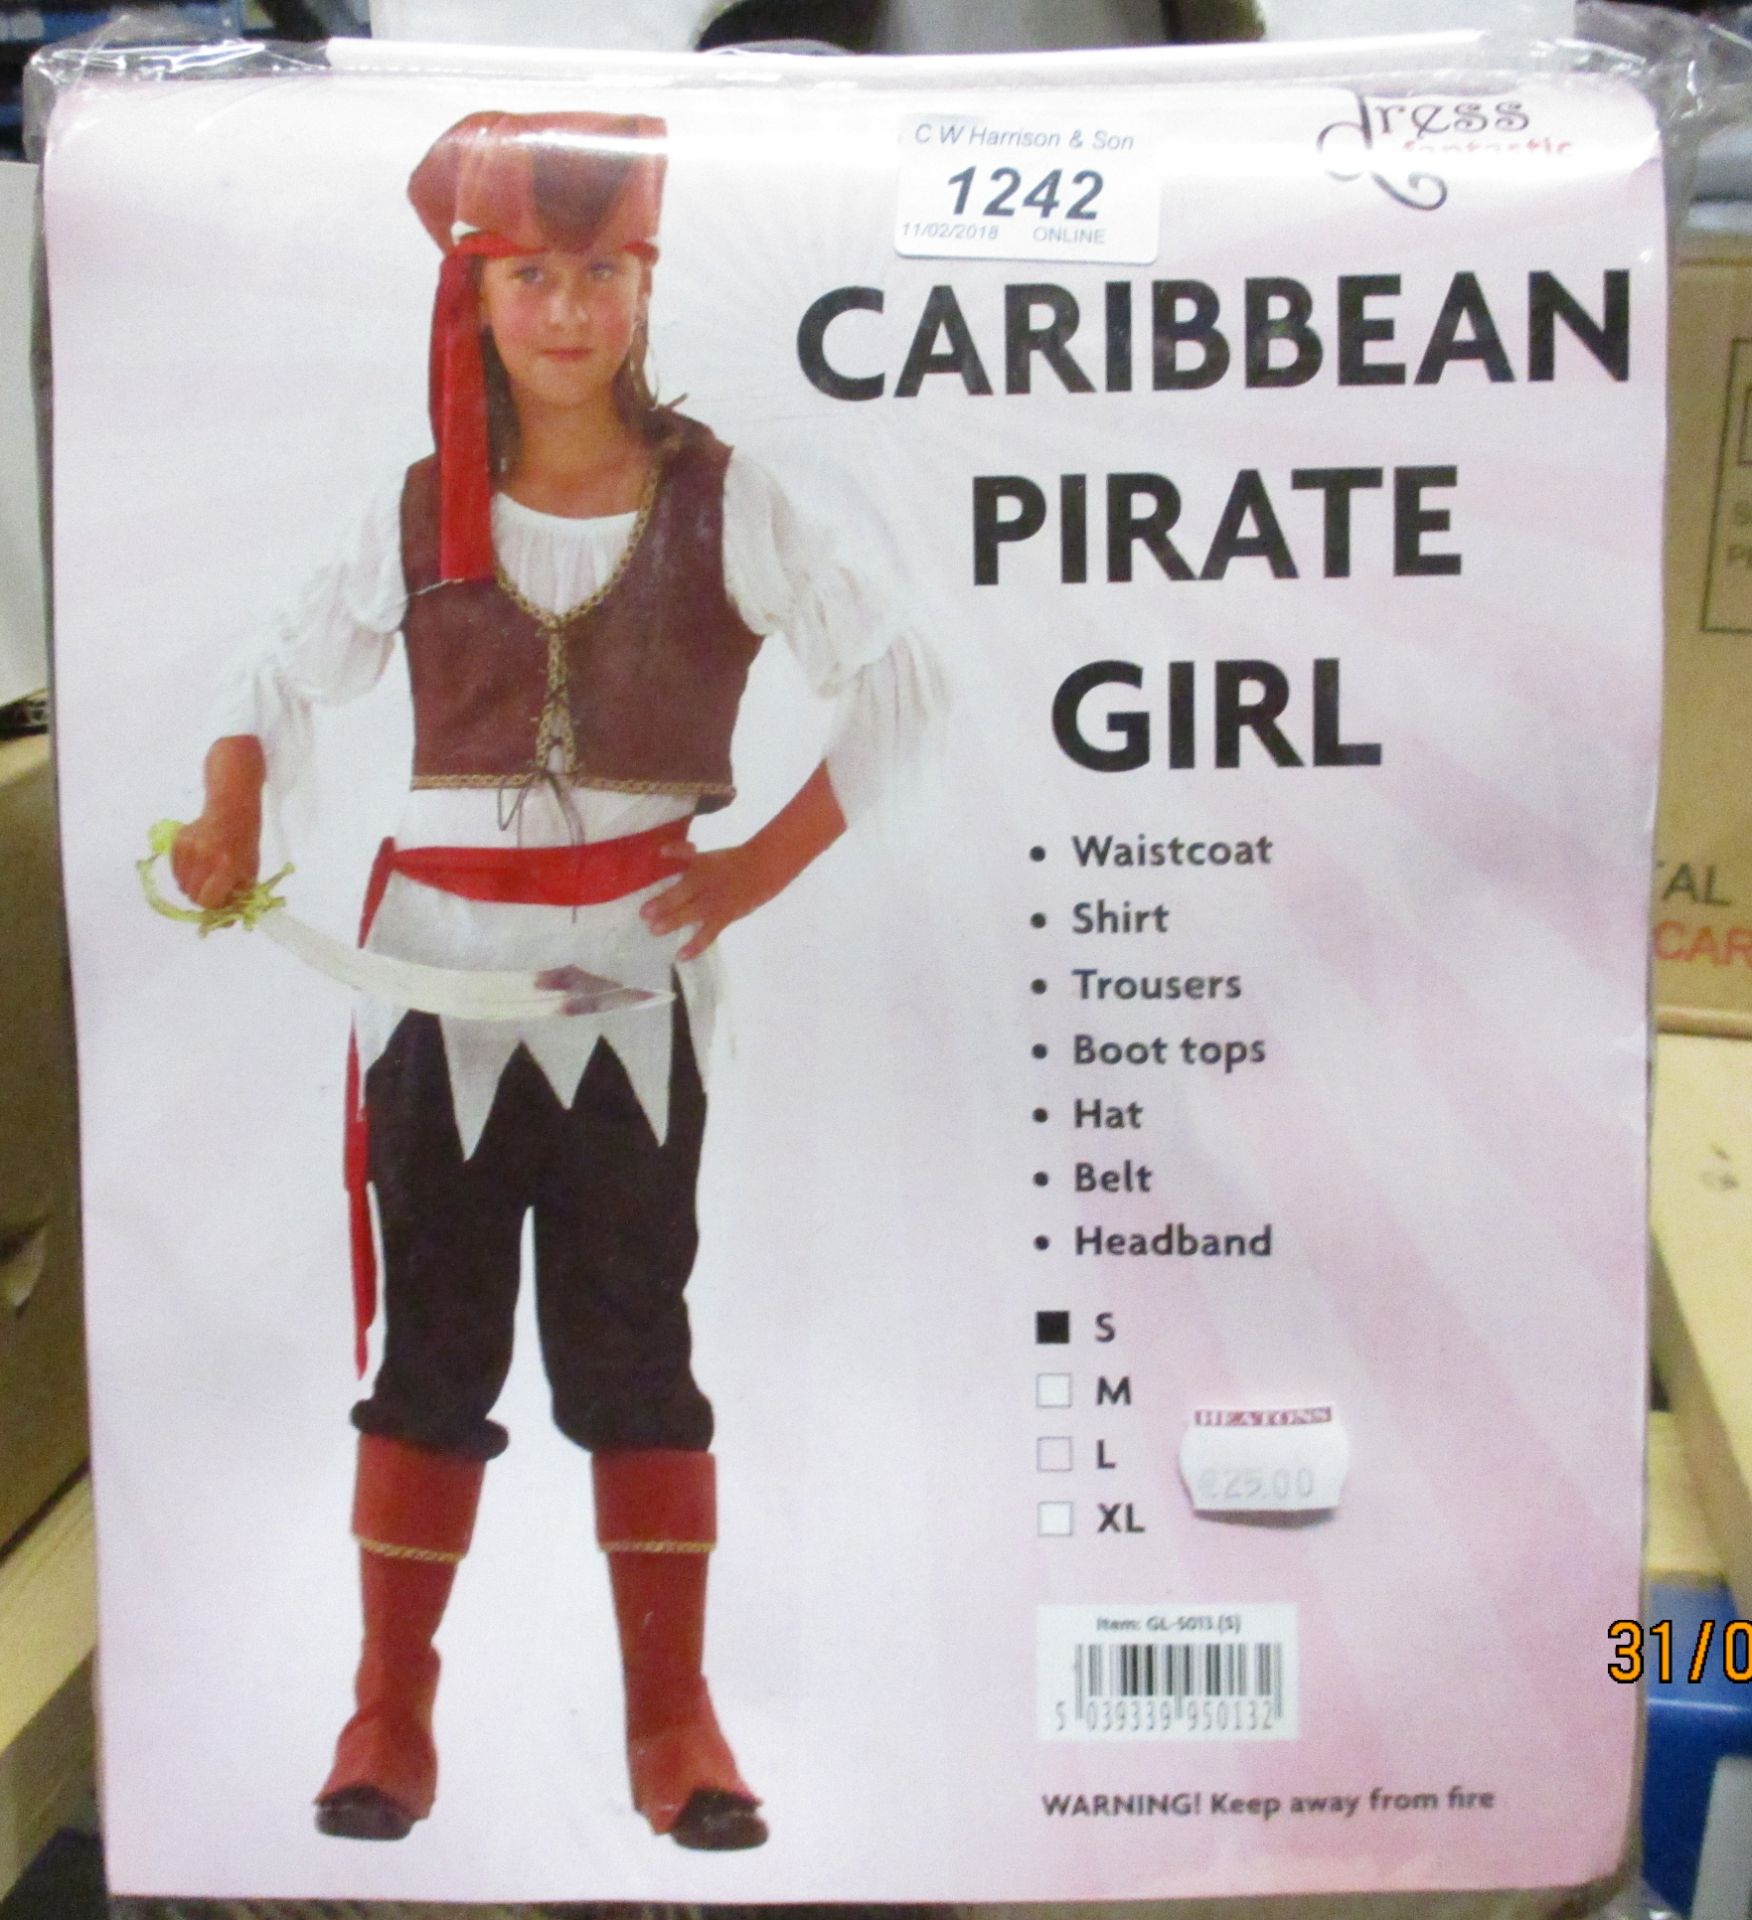 10 x Dress Fantastic children's pirate costumes (all sizes) - box not included